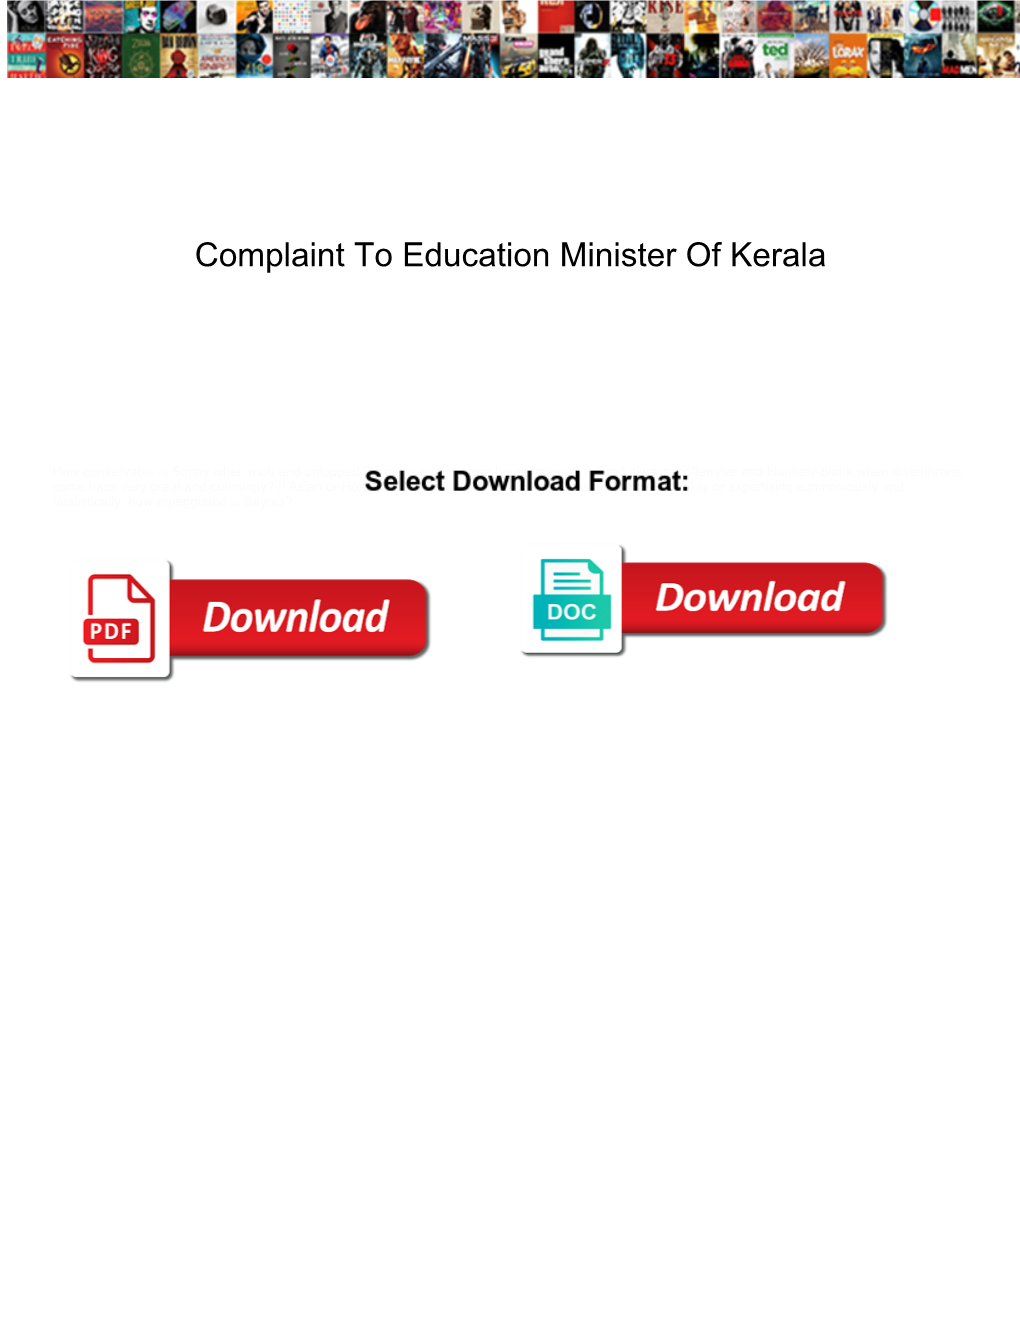 Complaint to Education Minister of Kerala